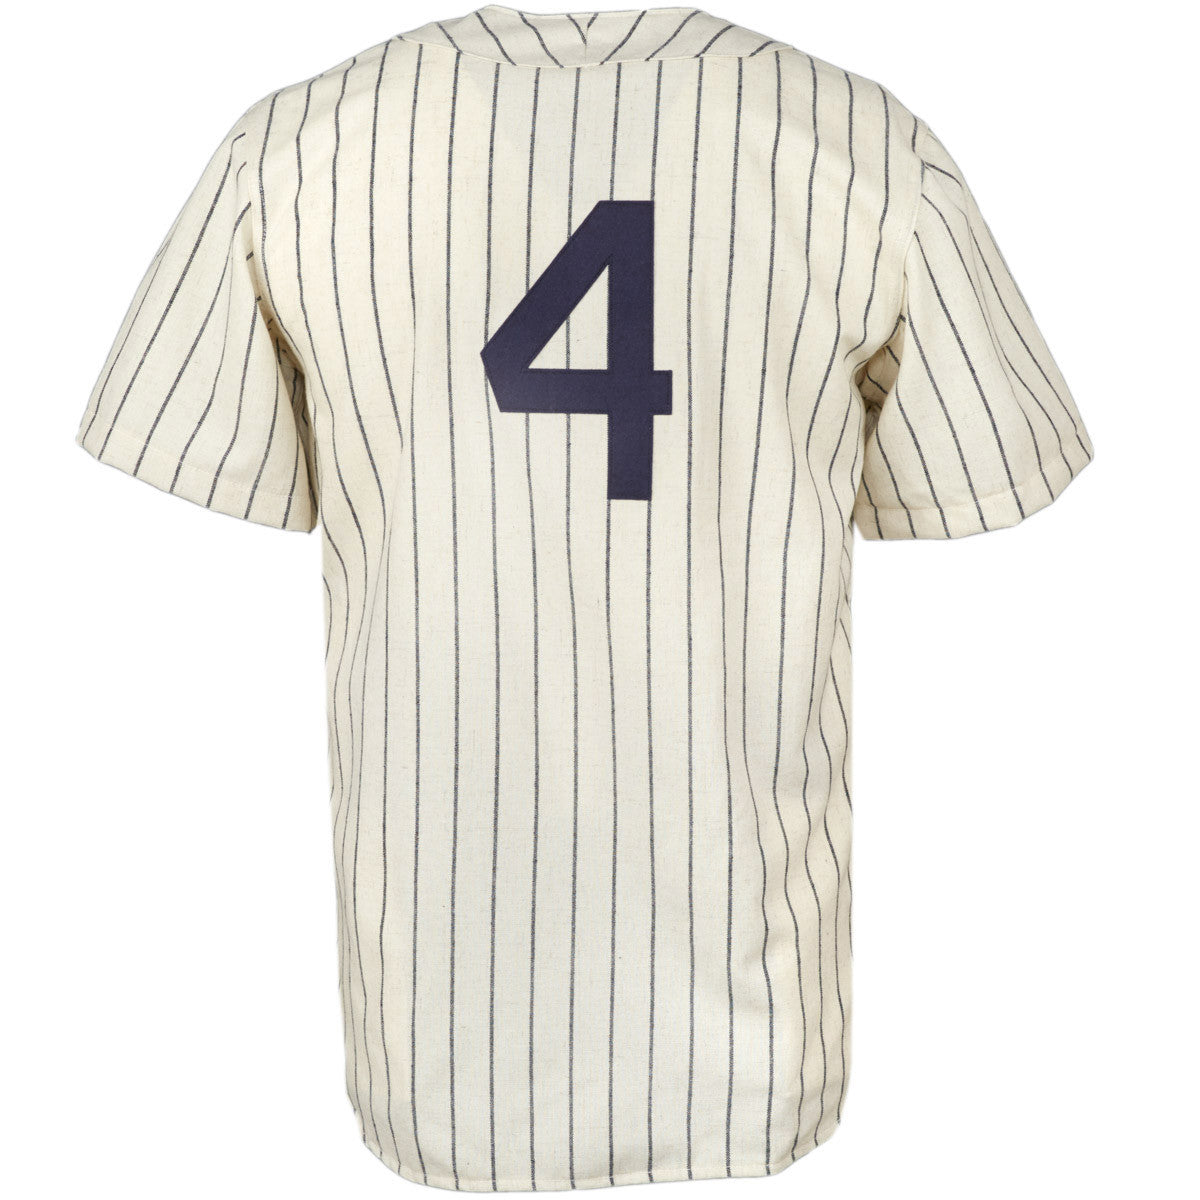 Fort Worth Cats – Ebbets Field Flannels